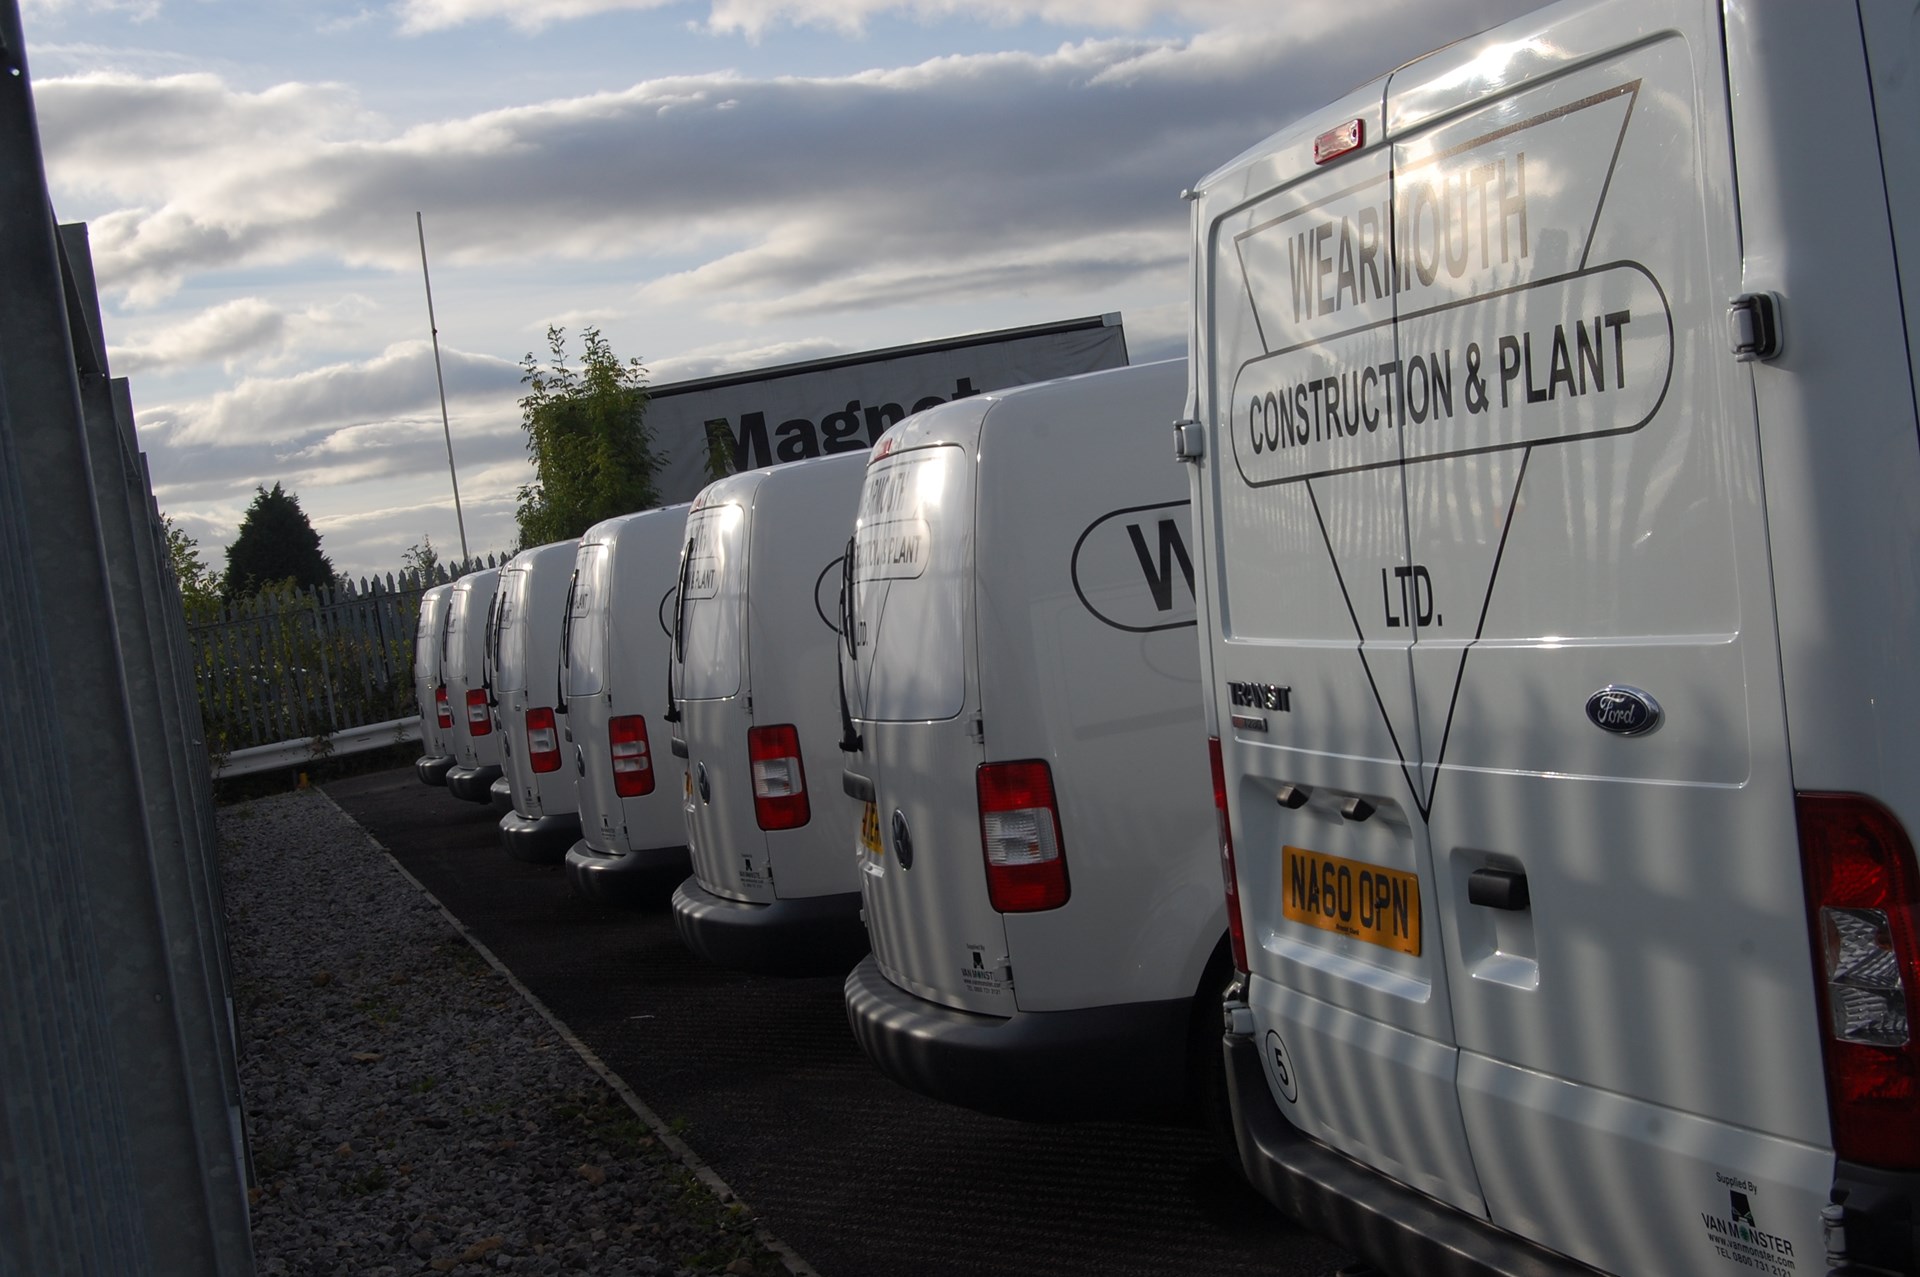 Fleet Of Vans For Construction And Plant